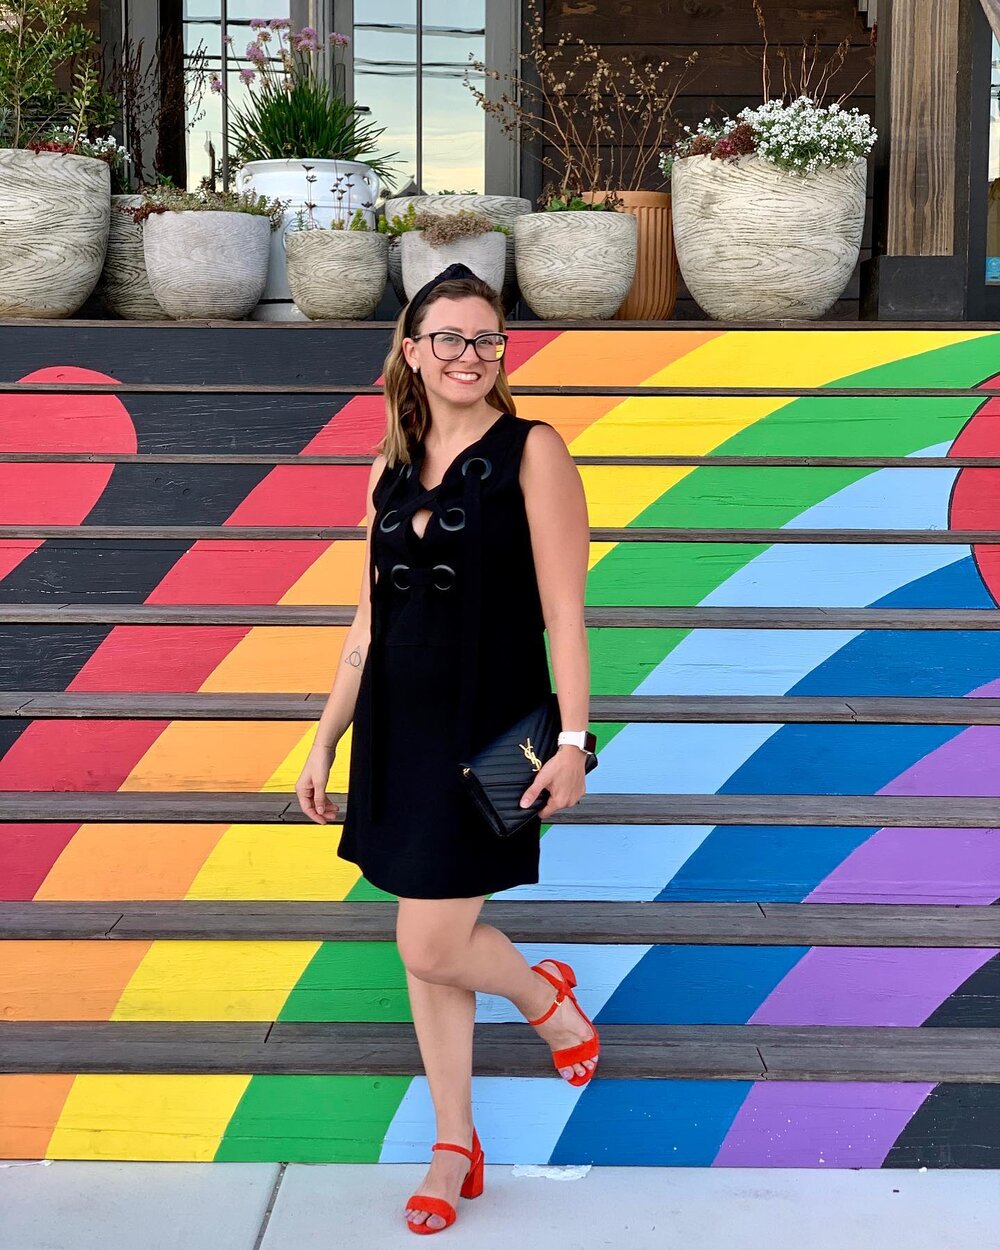 Last vacation night out with my new lace up LBD and a whole lot of ❤️🧡💛💚💙💜